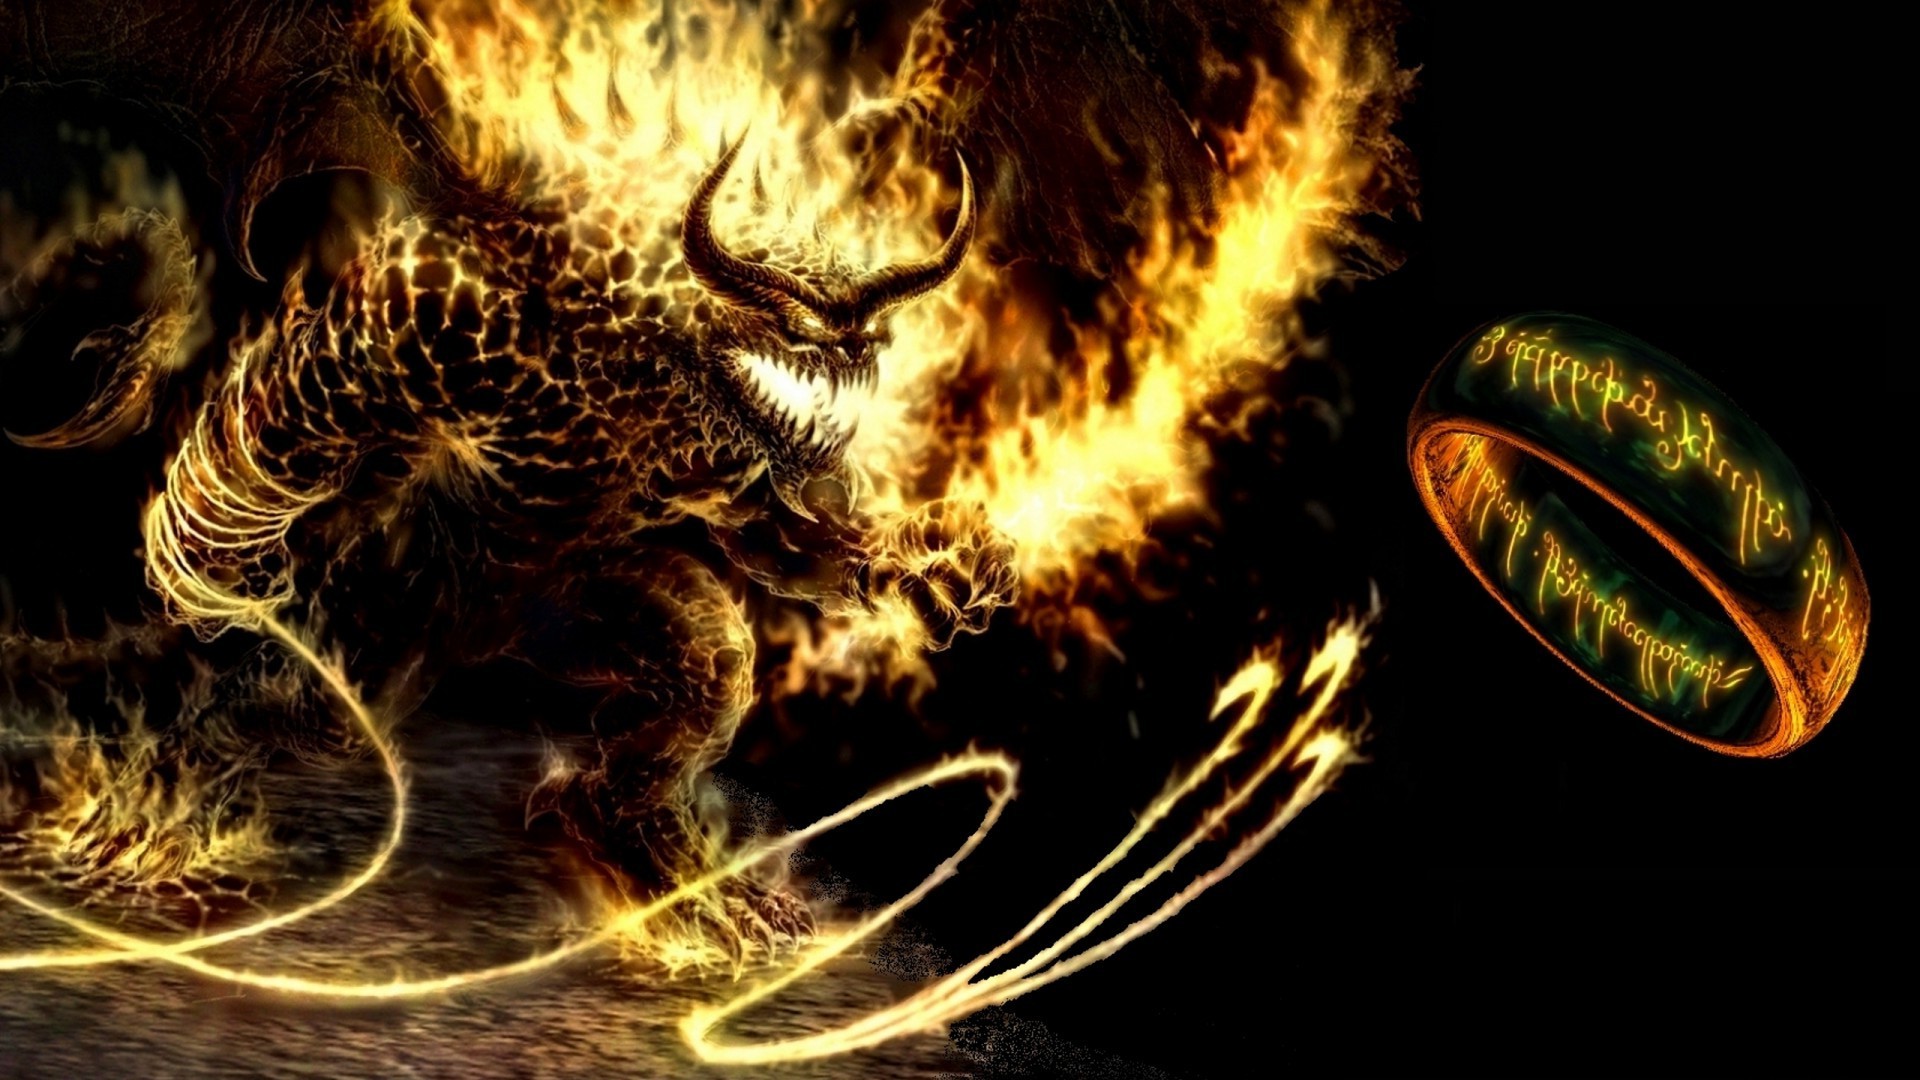 The Lord Of The Rings, Balrogs, Rings, Middle earth, Fantasy Art, Black Background, Fire, Demon Wallpaper